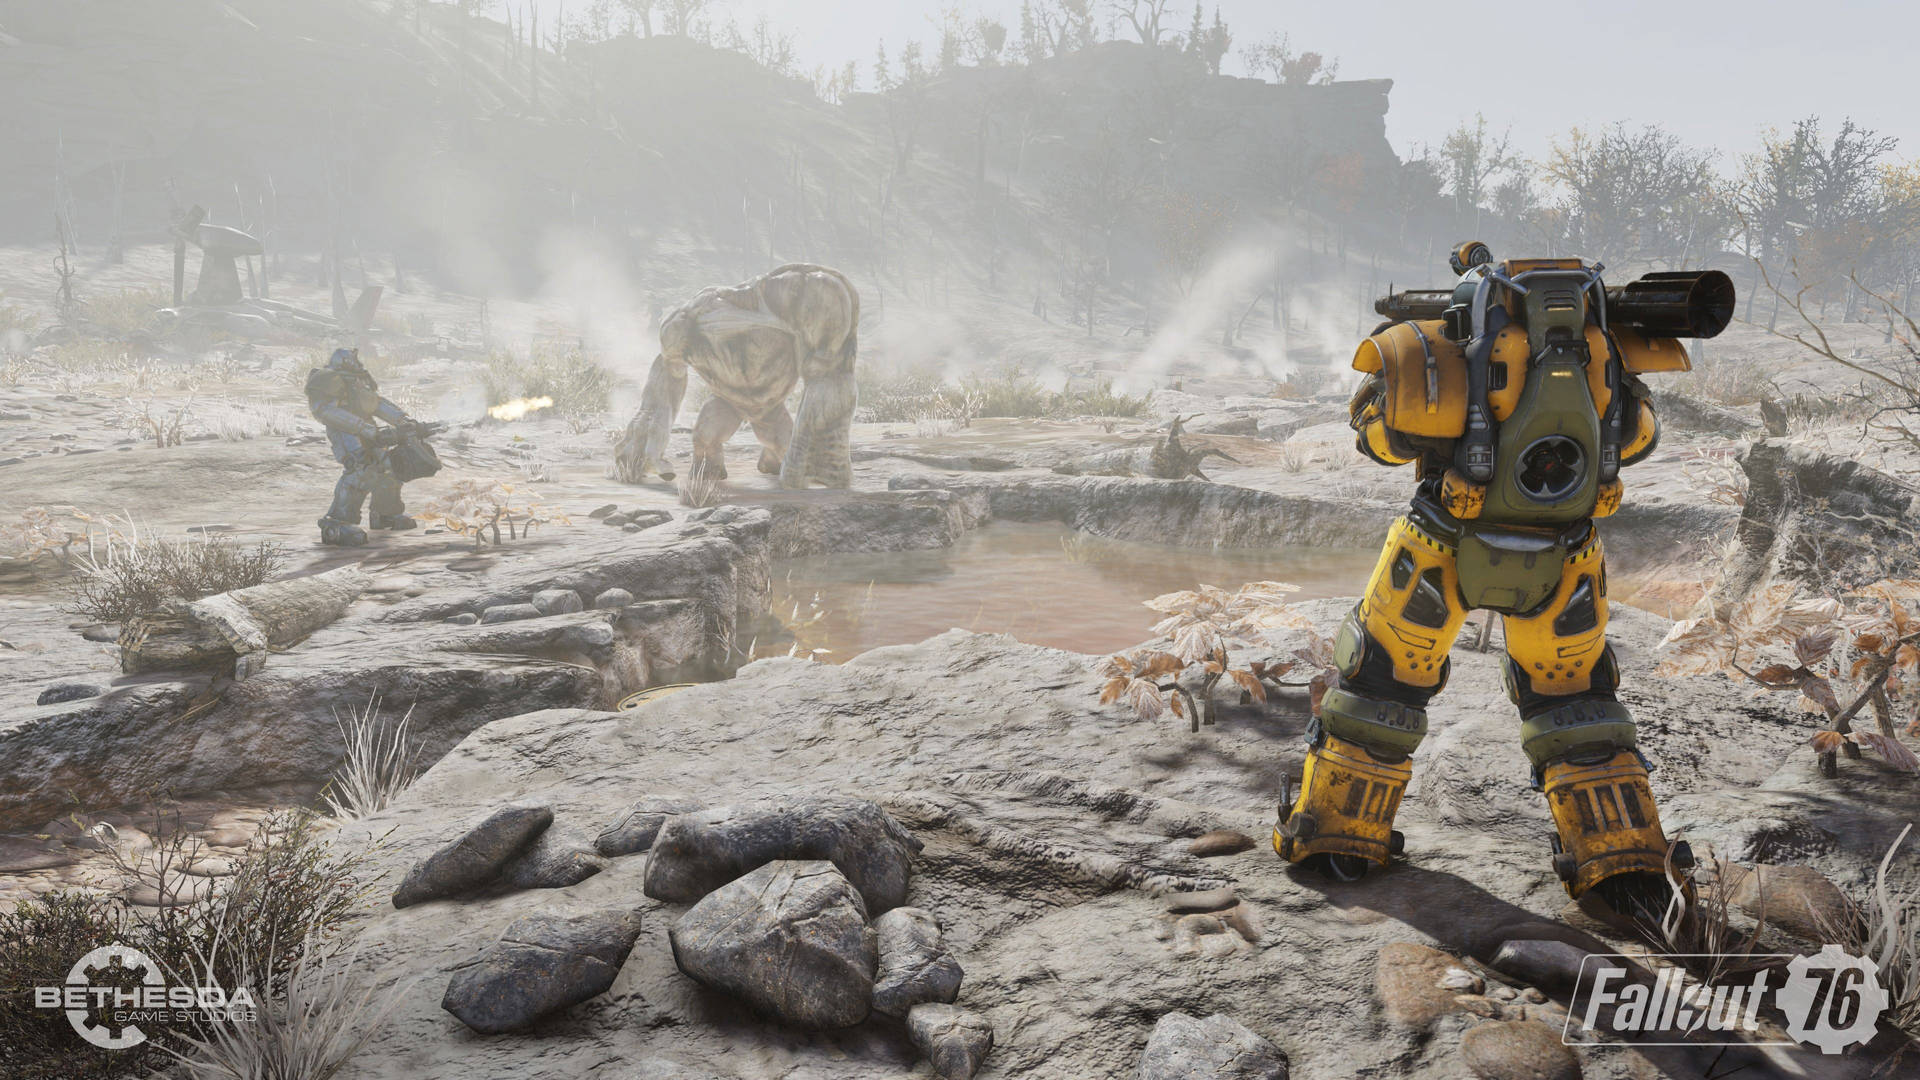 Impress Your Friends And Foes Alike When Wearing The Iconic Yellow Power Armor In Fallout 76! Wallpaper